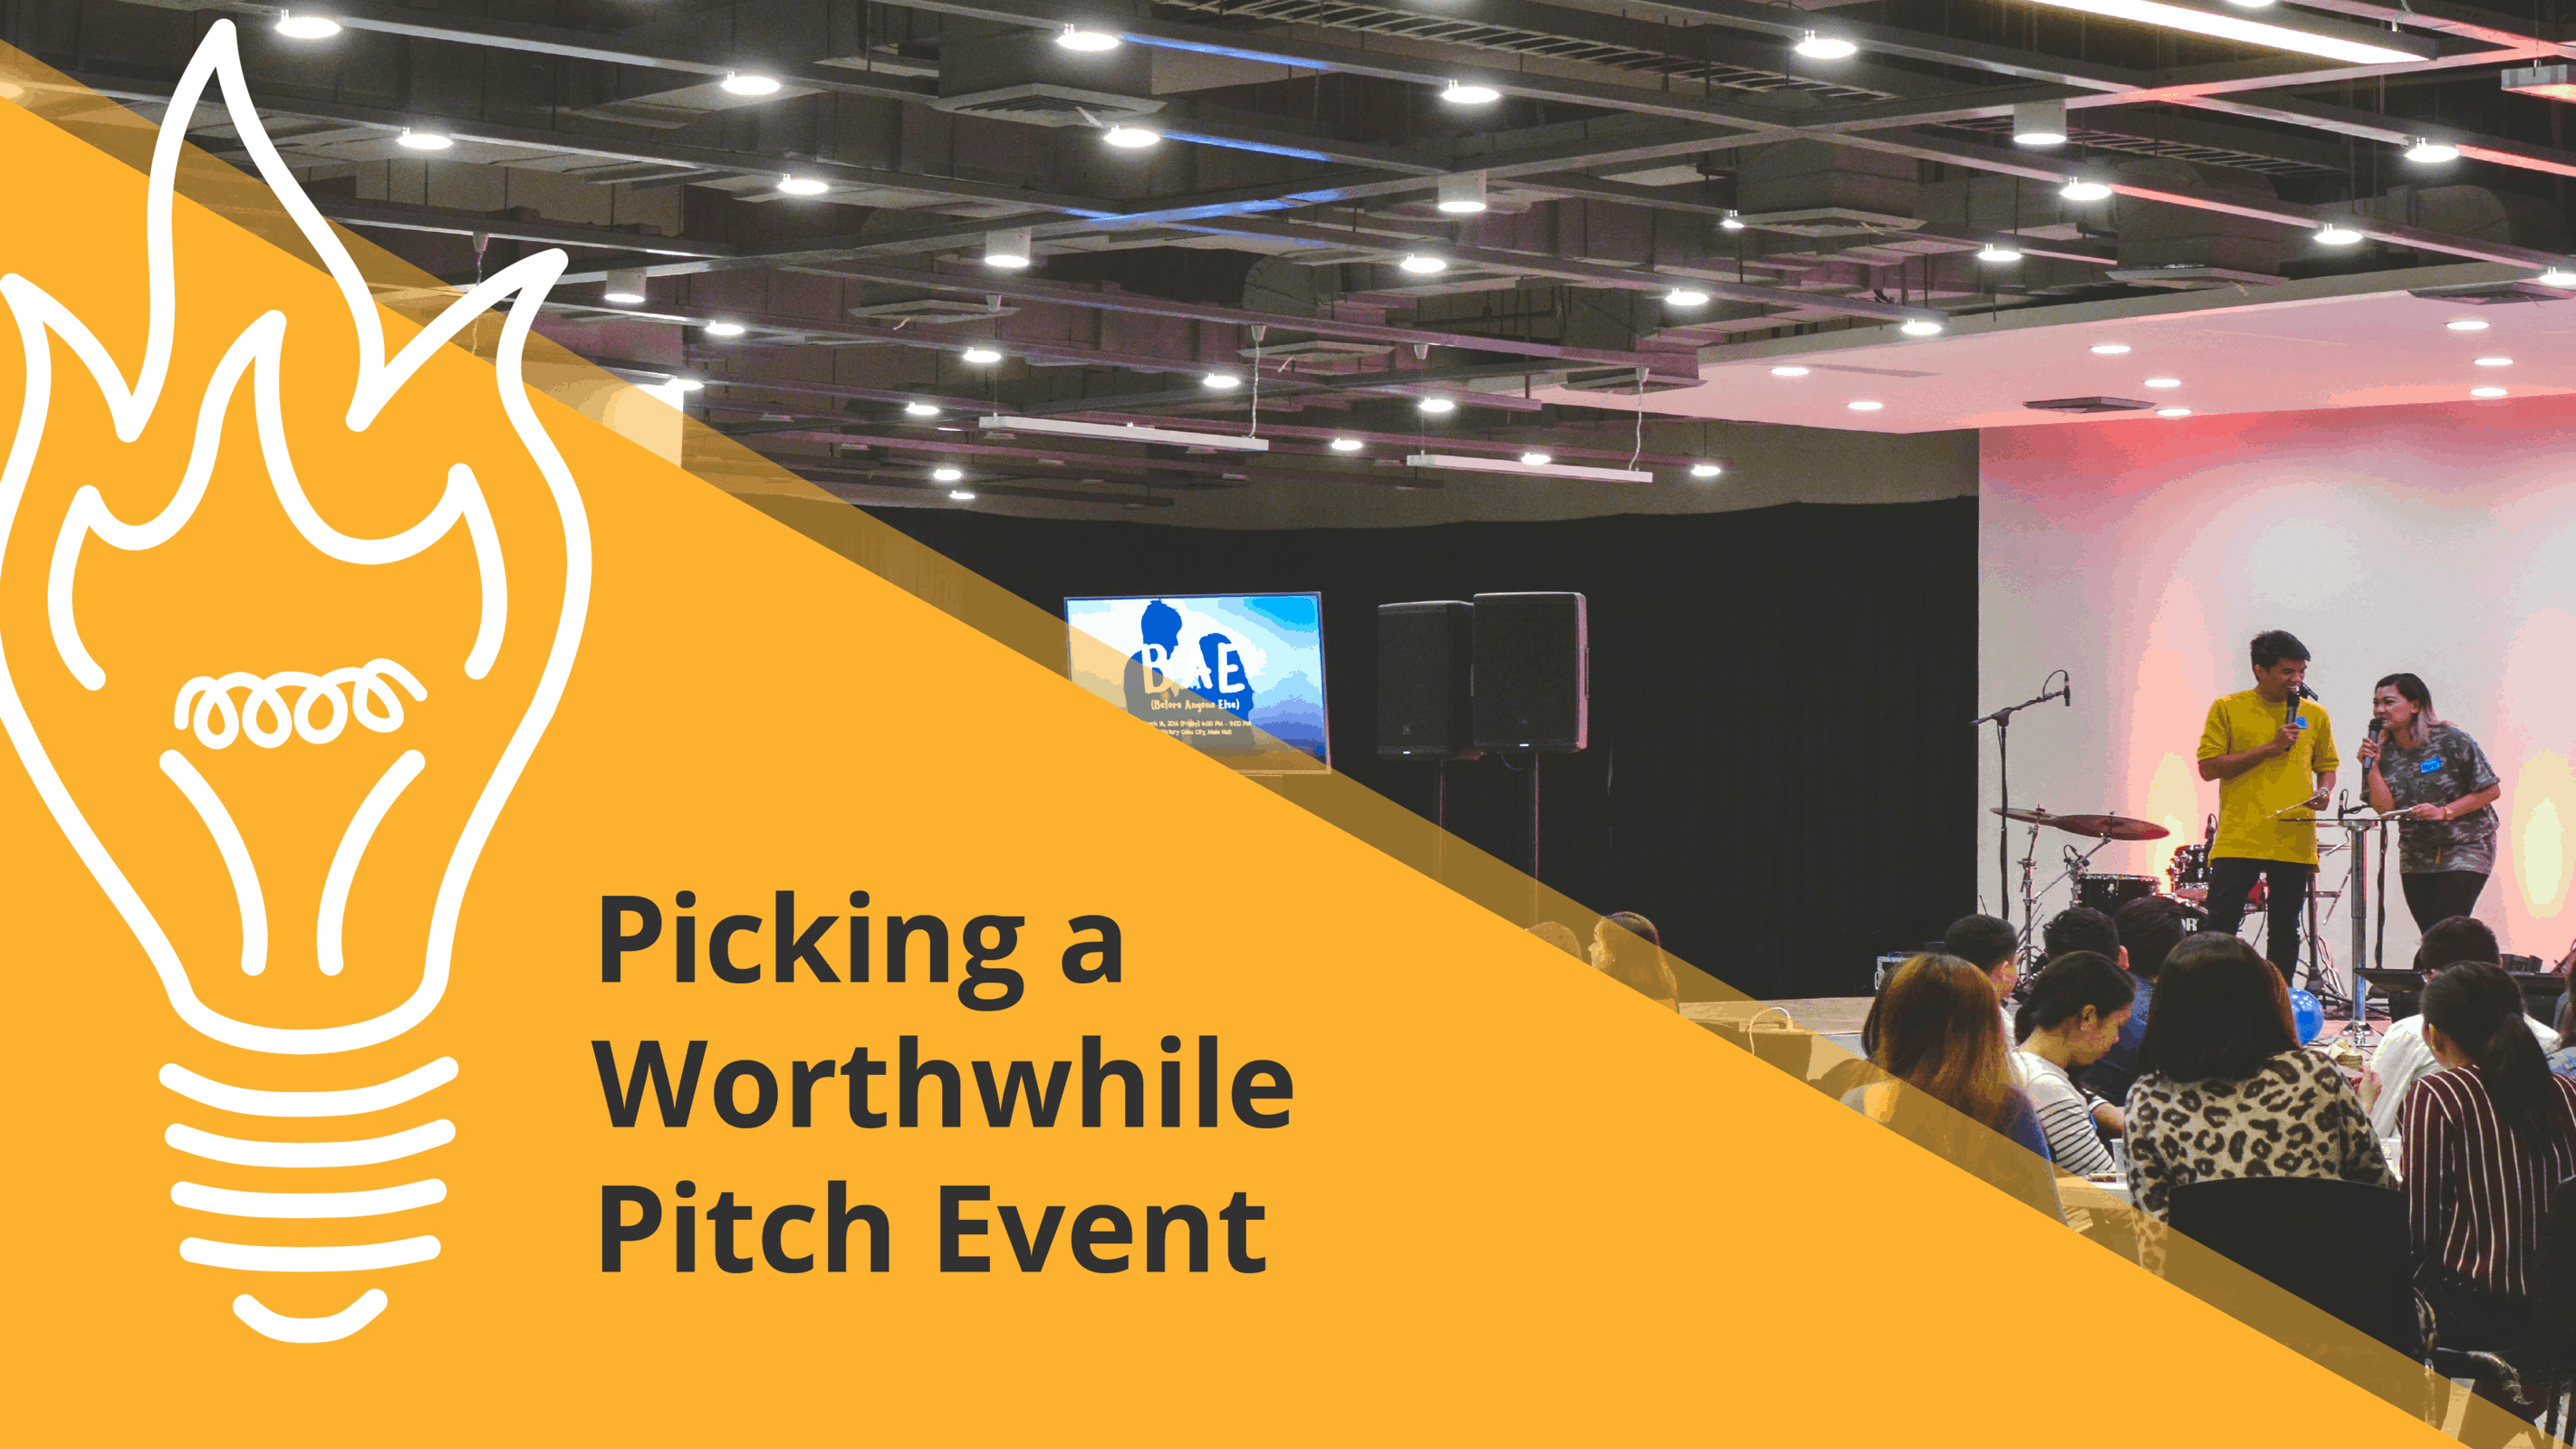 Pitch worthwhile events